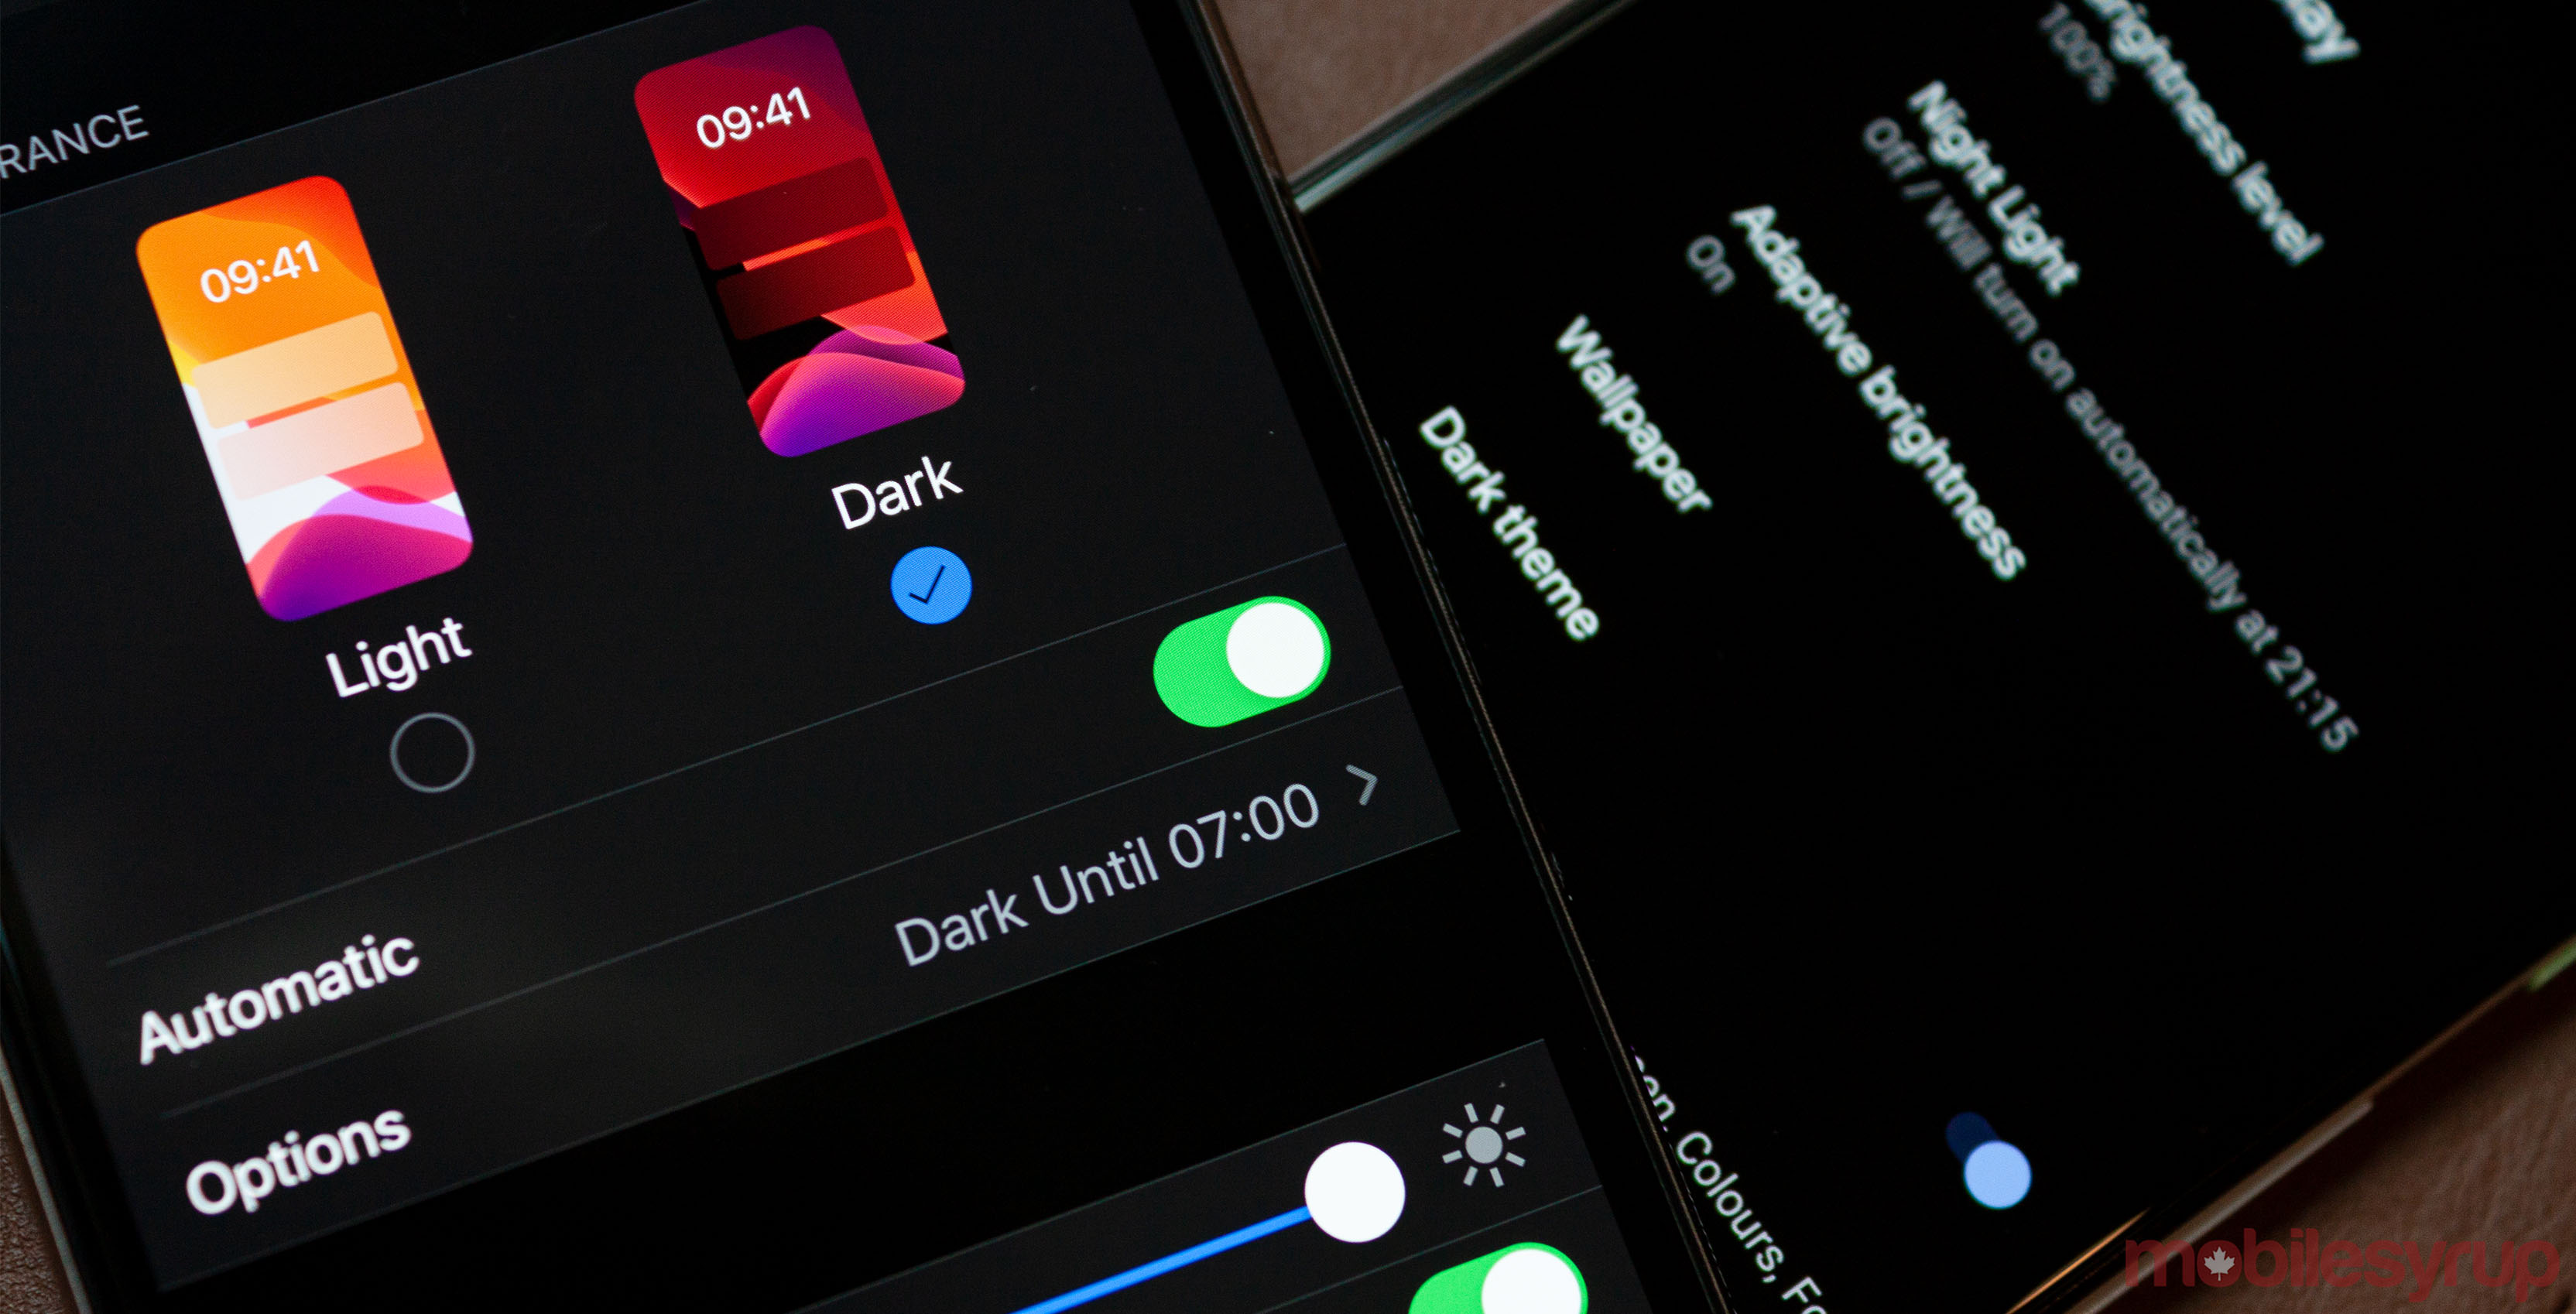 Dark mode on iOS and Android